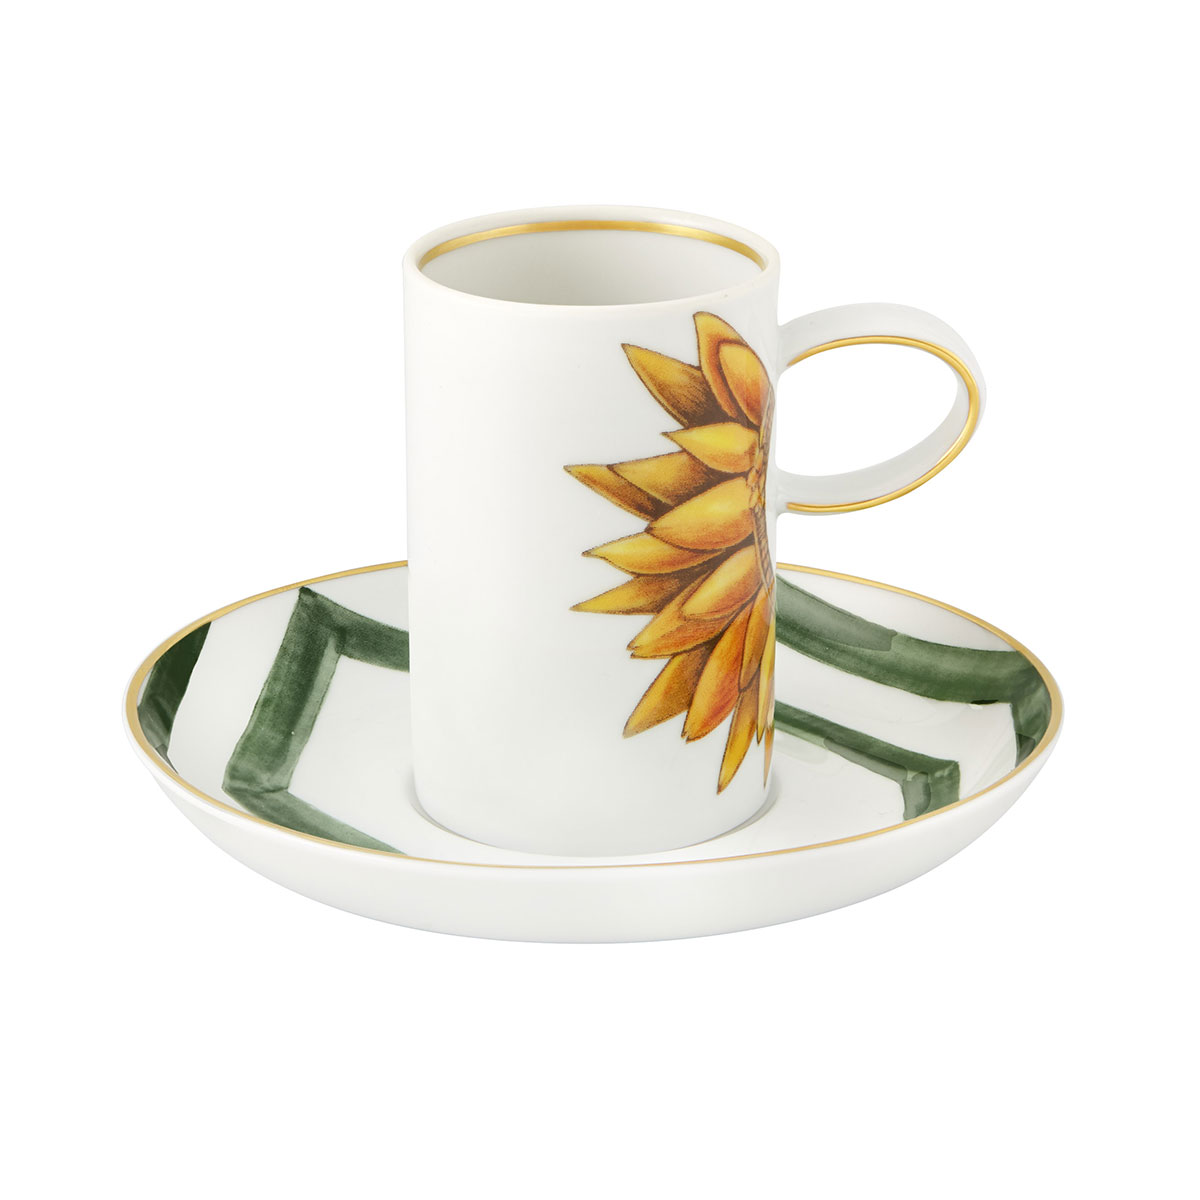 Vista Alegre Porcelain Amazonia Coffee Cup And Saucer